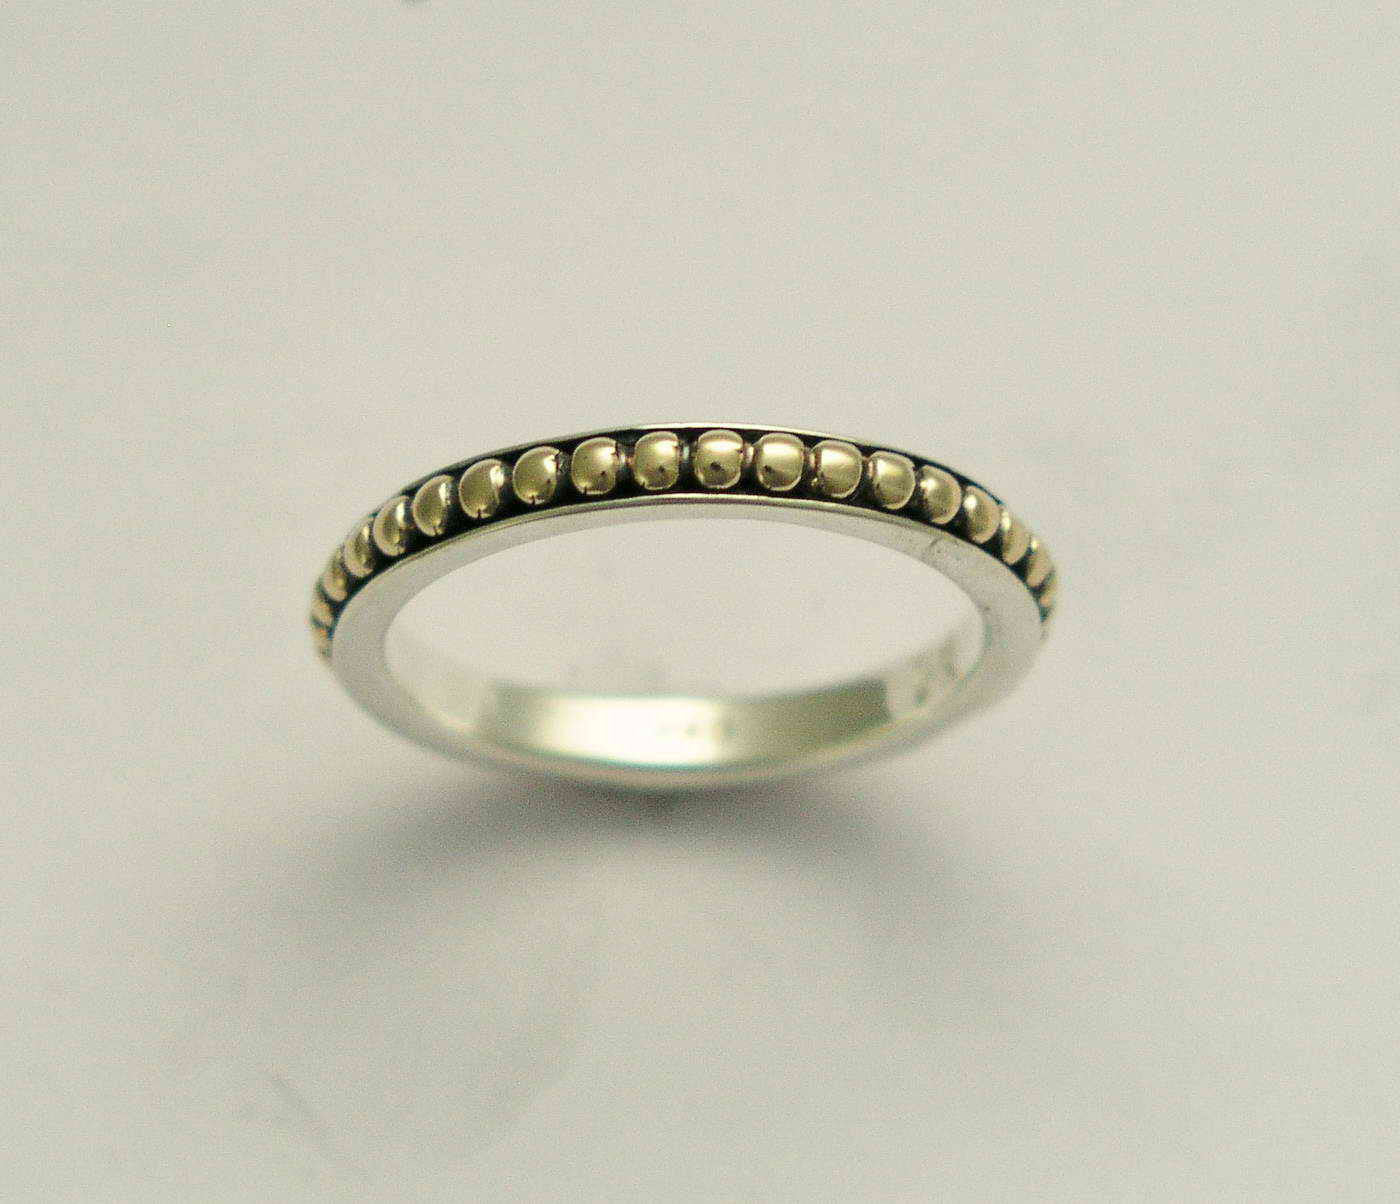 Wedding band, Thin simple ring, sterling silver ring, dotted gold band, mixed metal ring,stacking band, thin band - Evening light R0911